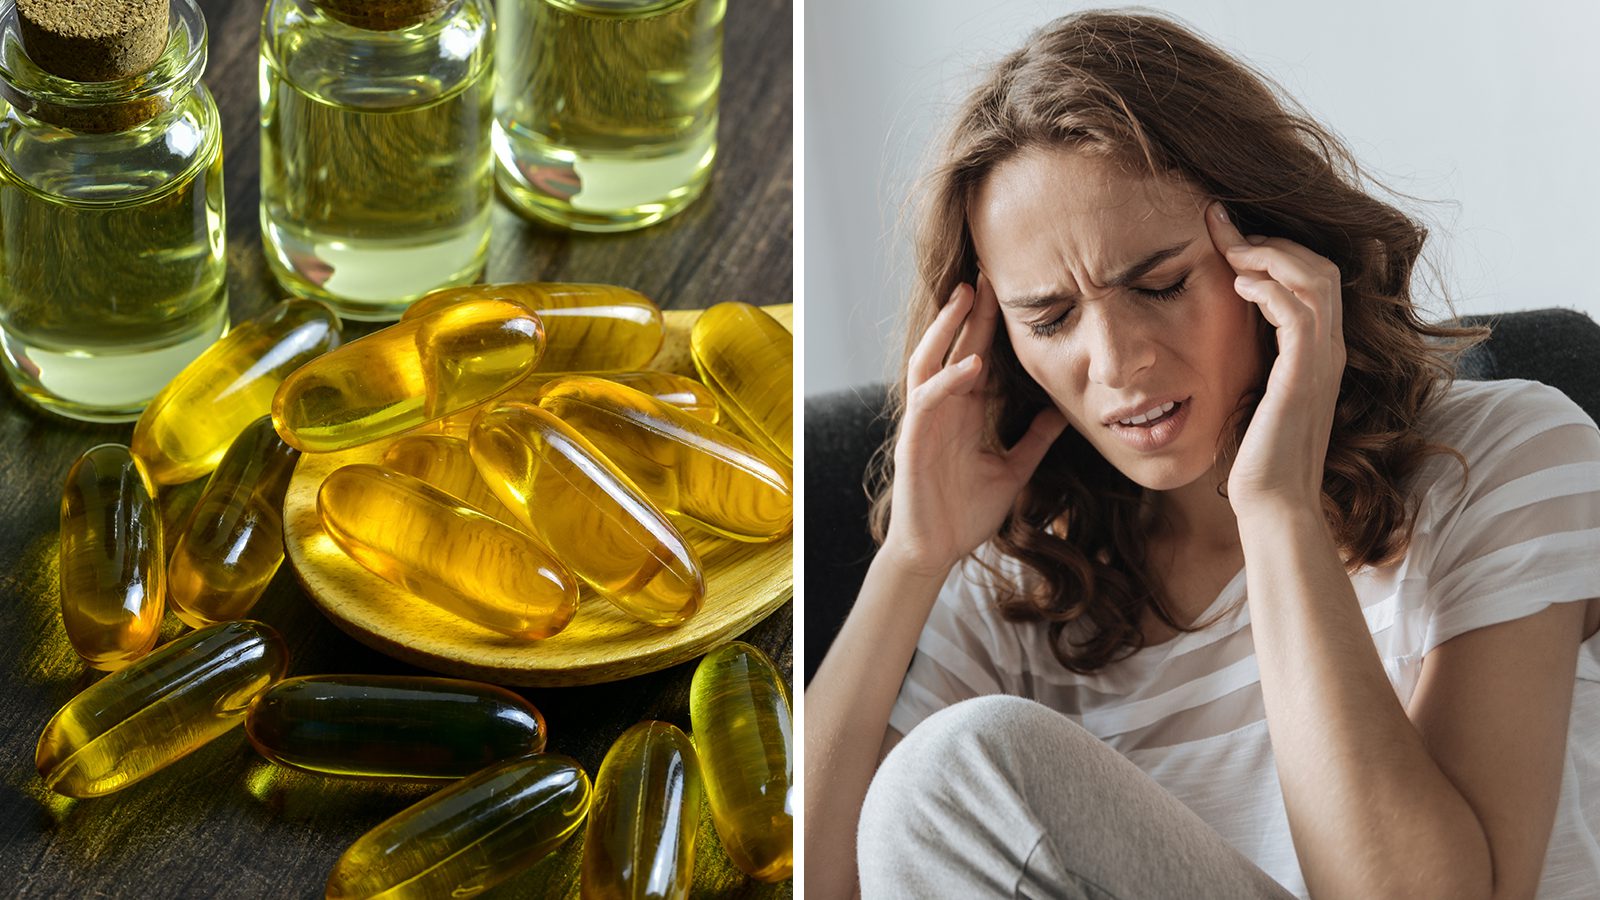 Researchers Prove How Fatty Fish Oils Can Reduce Migraines